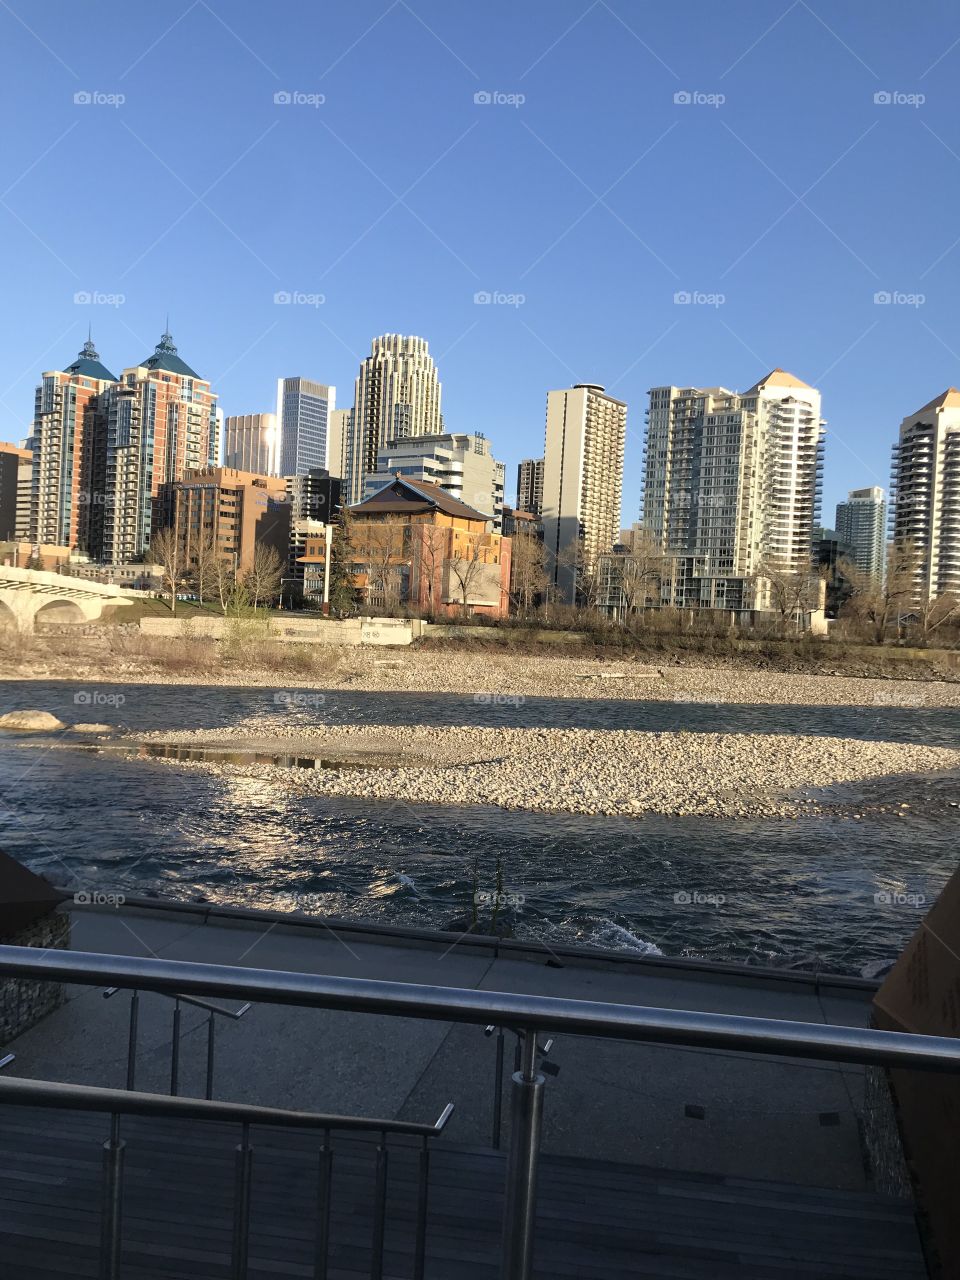 The skyline of Calgary near the bow river, in the southwest region of Calgary, which is also considered downtown Calgary. Doesn’t it look absolutely amazing during the day? It helps that this photo was taken in the summer too! 🌞